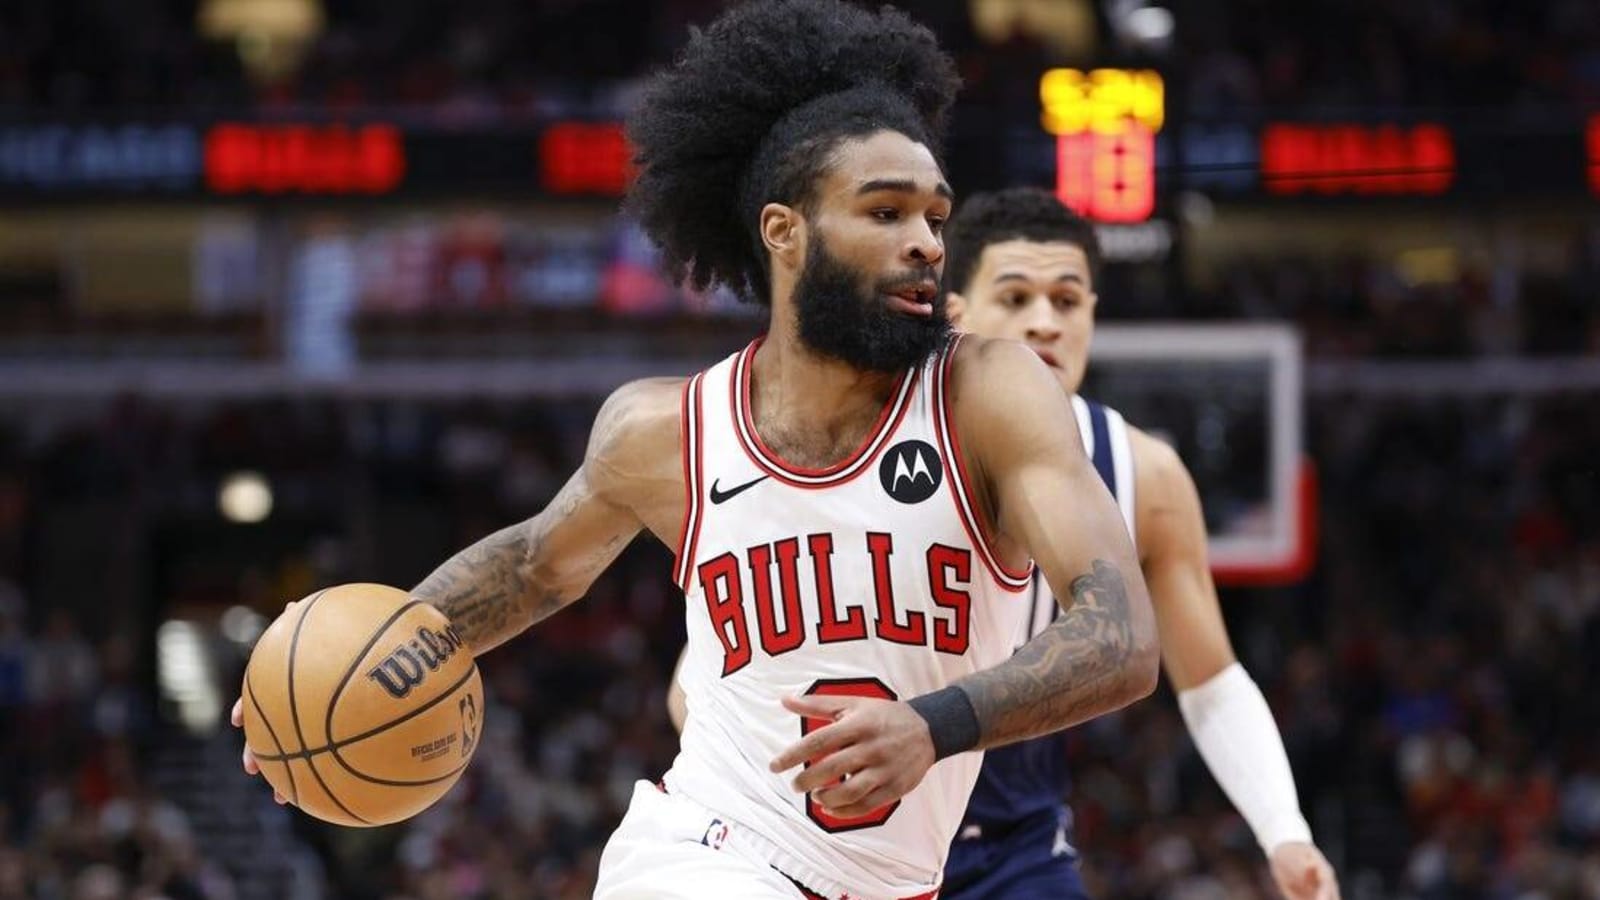 Bulls could be without Coby White again vs. Wizards